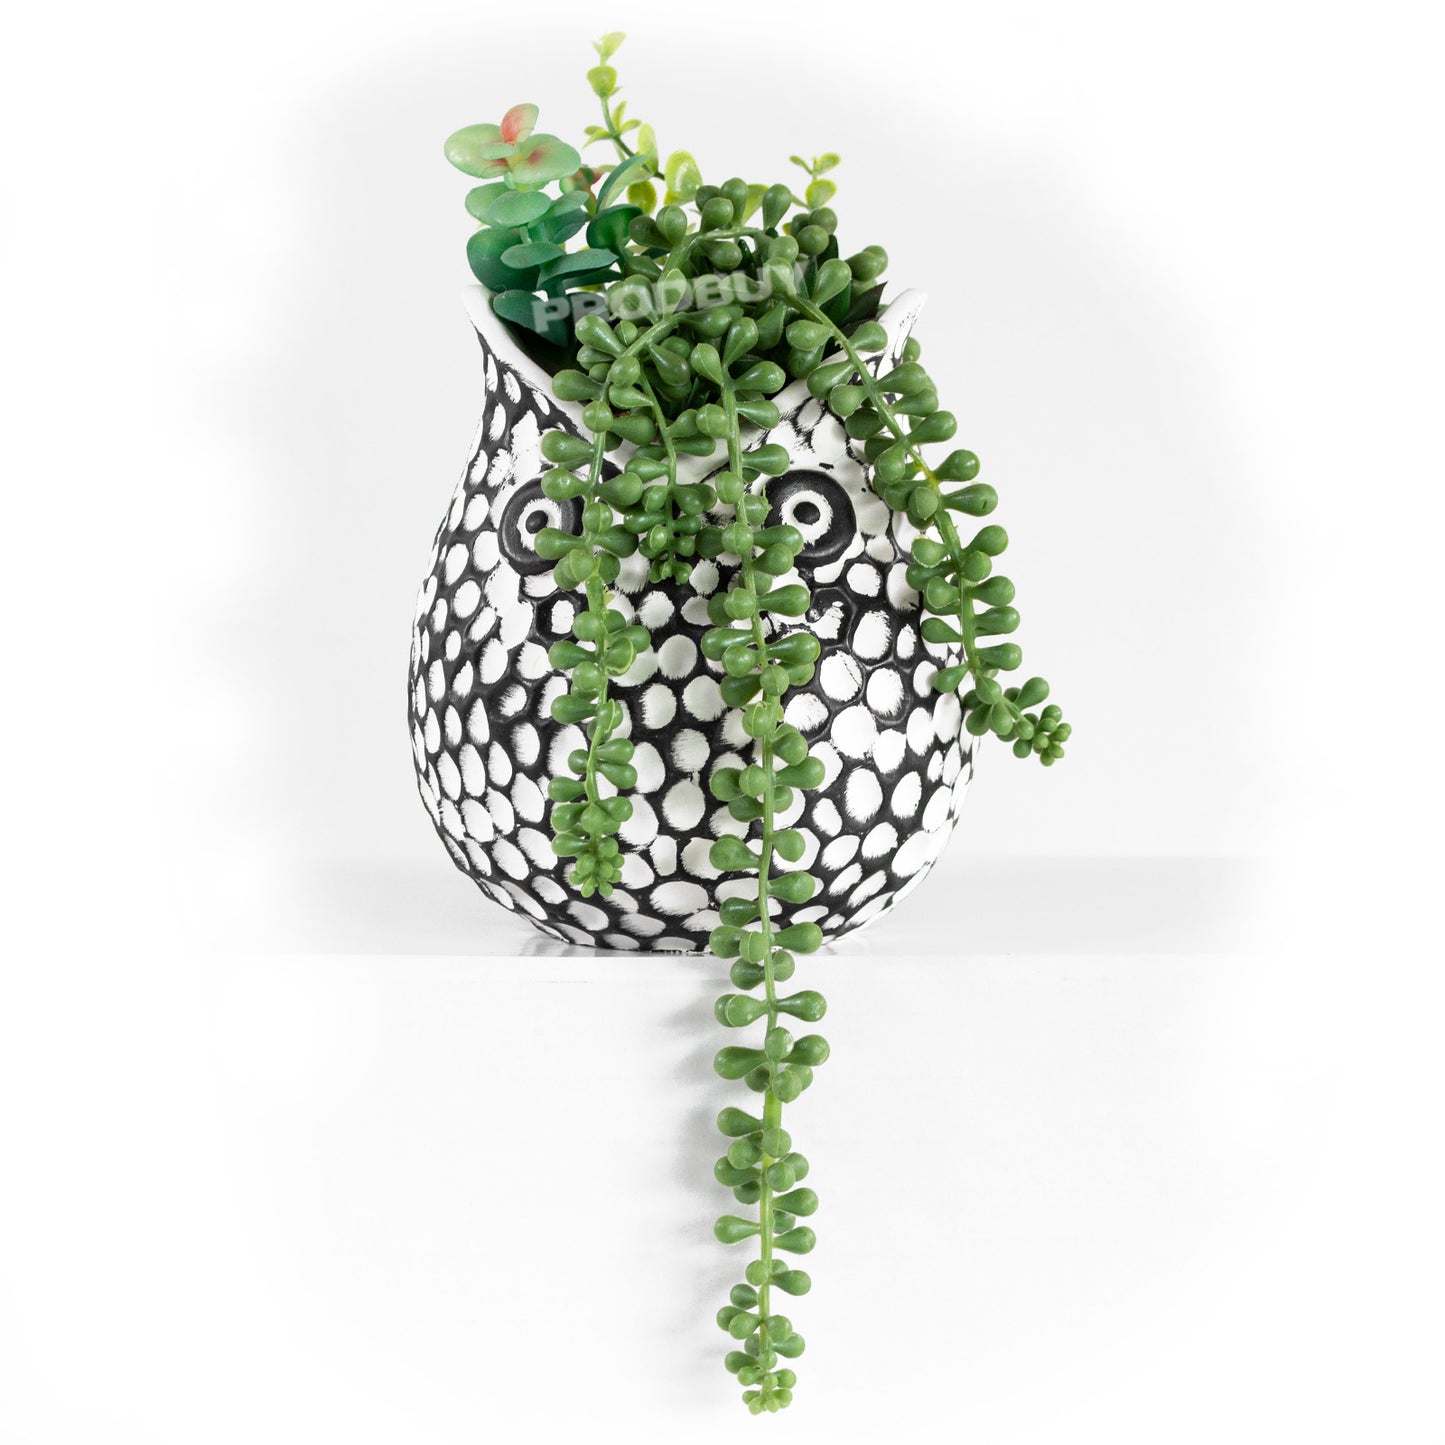 Owl Shaped Plant Pot with Artificial Houseplant Decoration